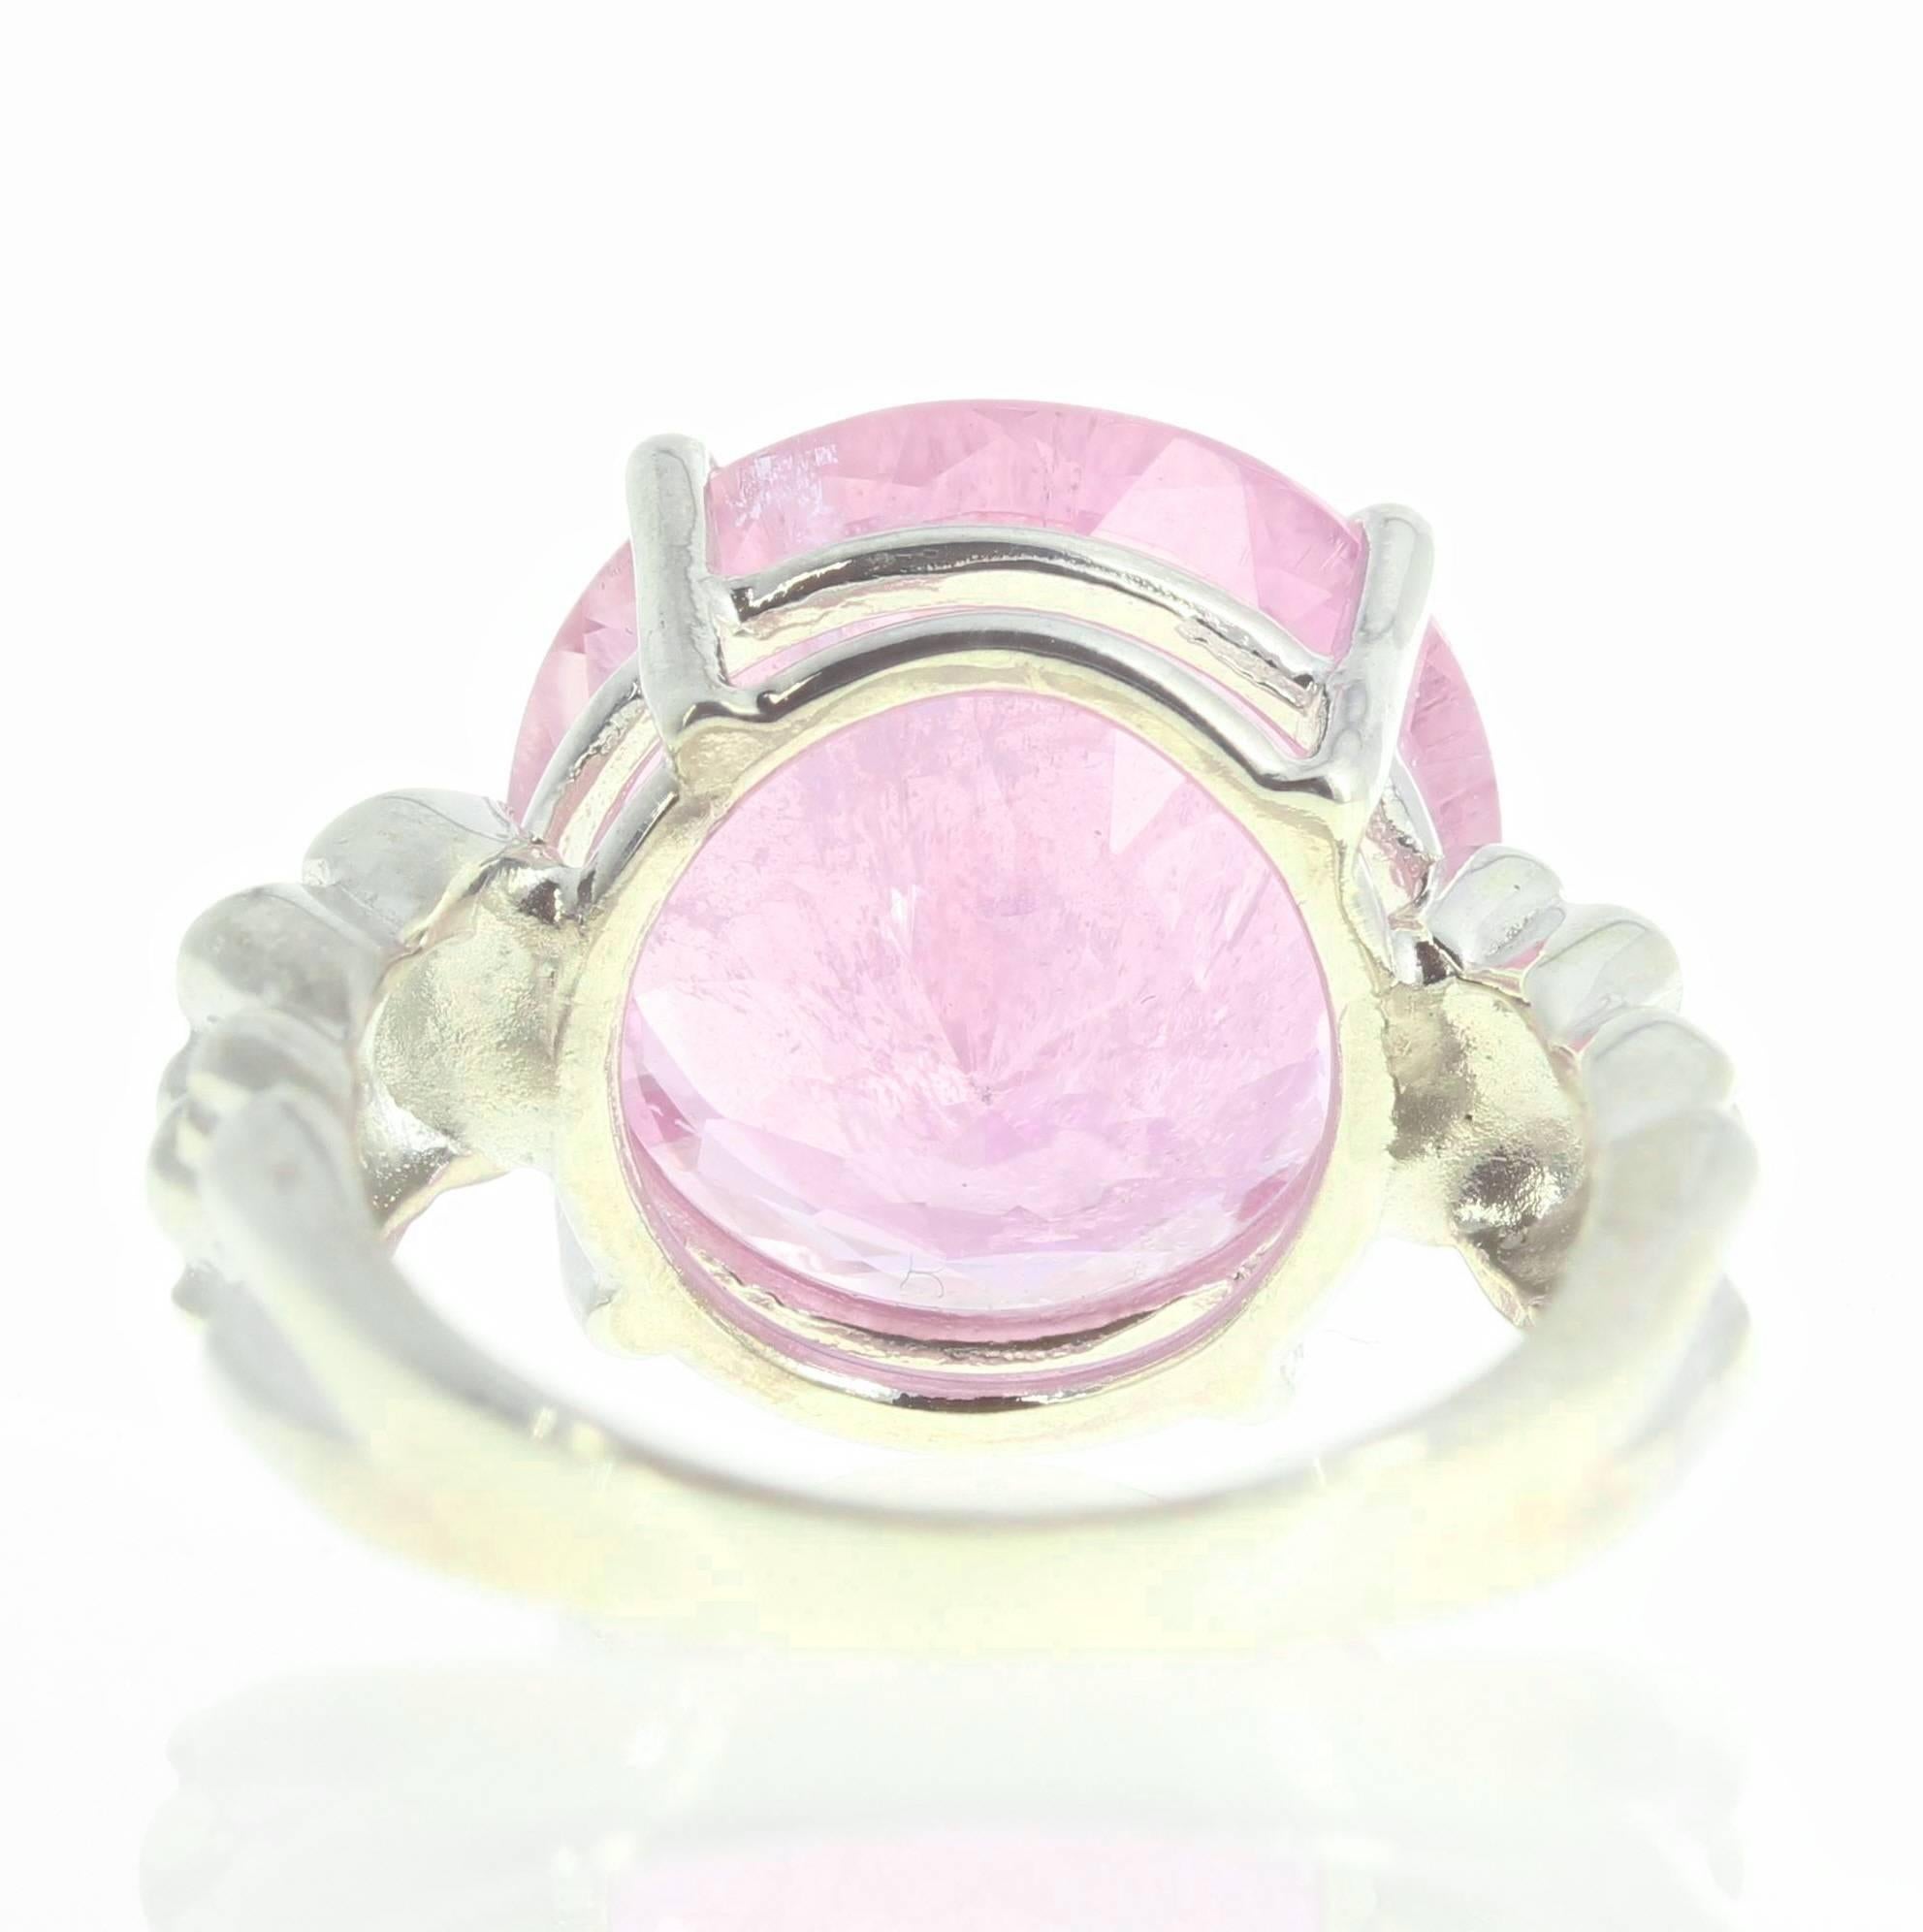 AJD Extraordinary Sparkling 13.5Ct BrightPinky Kunzite Silver Cocktail Ring In New Condition For Sale In Raleigh, NC